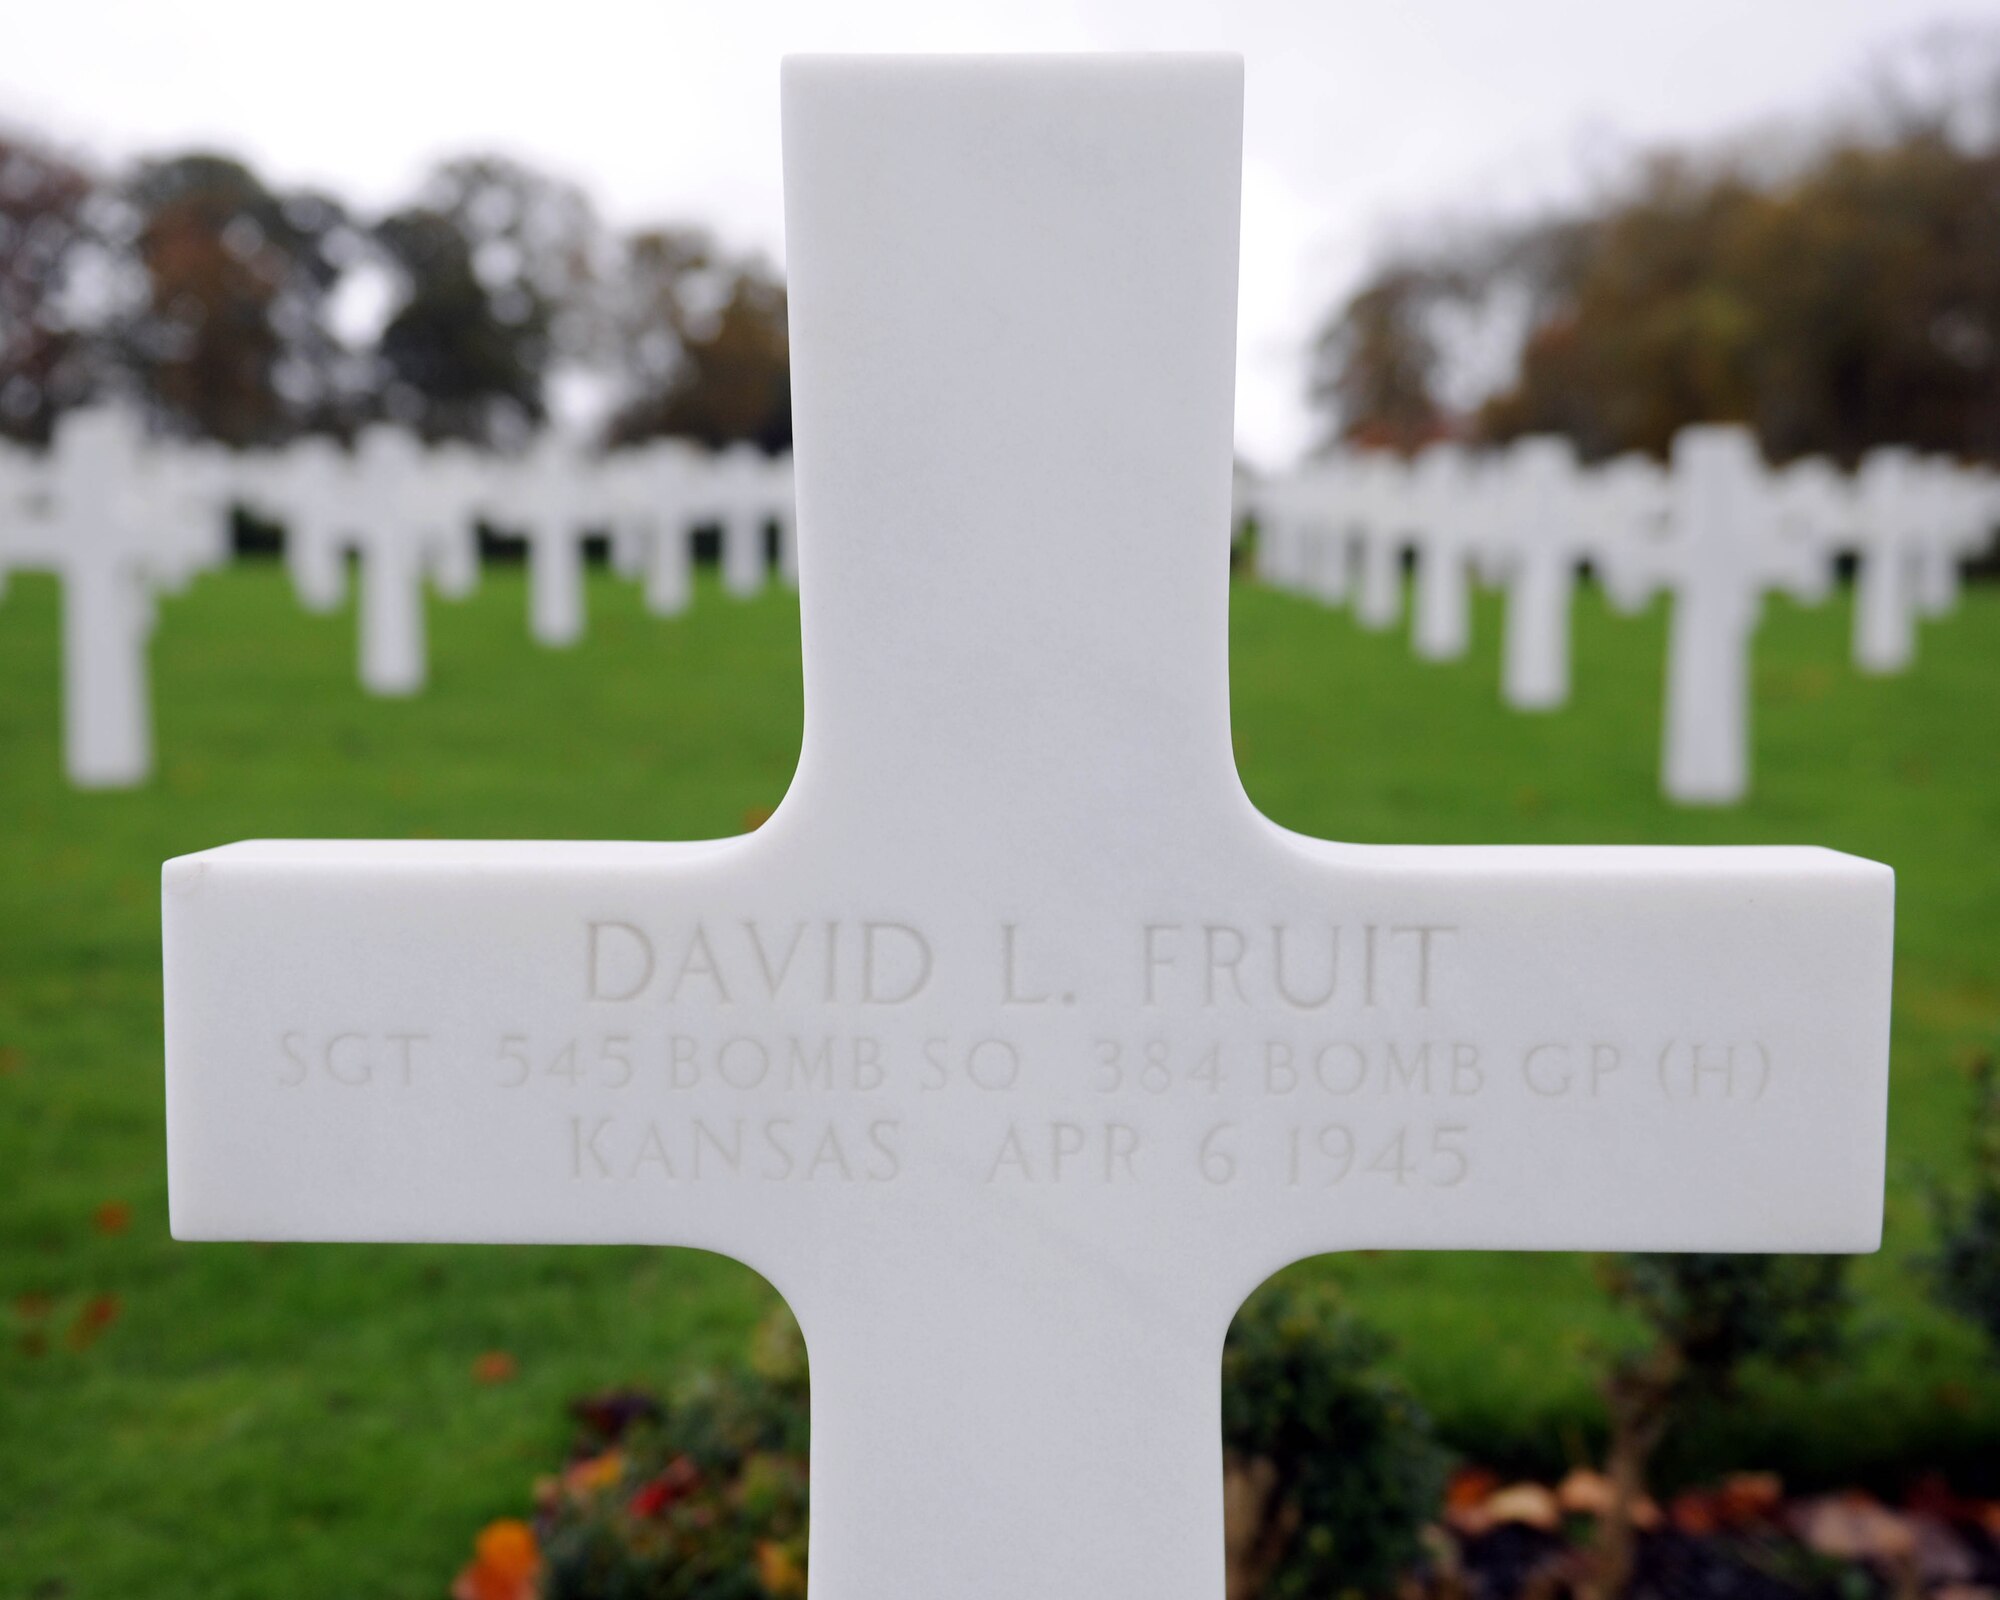 CAMBRIDGE - Army Air Corps Sgt. David L. Fruit, 545th Bomb Squadron, is remembered on Veteran's Day at Madingley American Cemetery. (U.S. Air Force photo by Staff Sgt. Joel Mease)